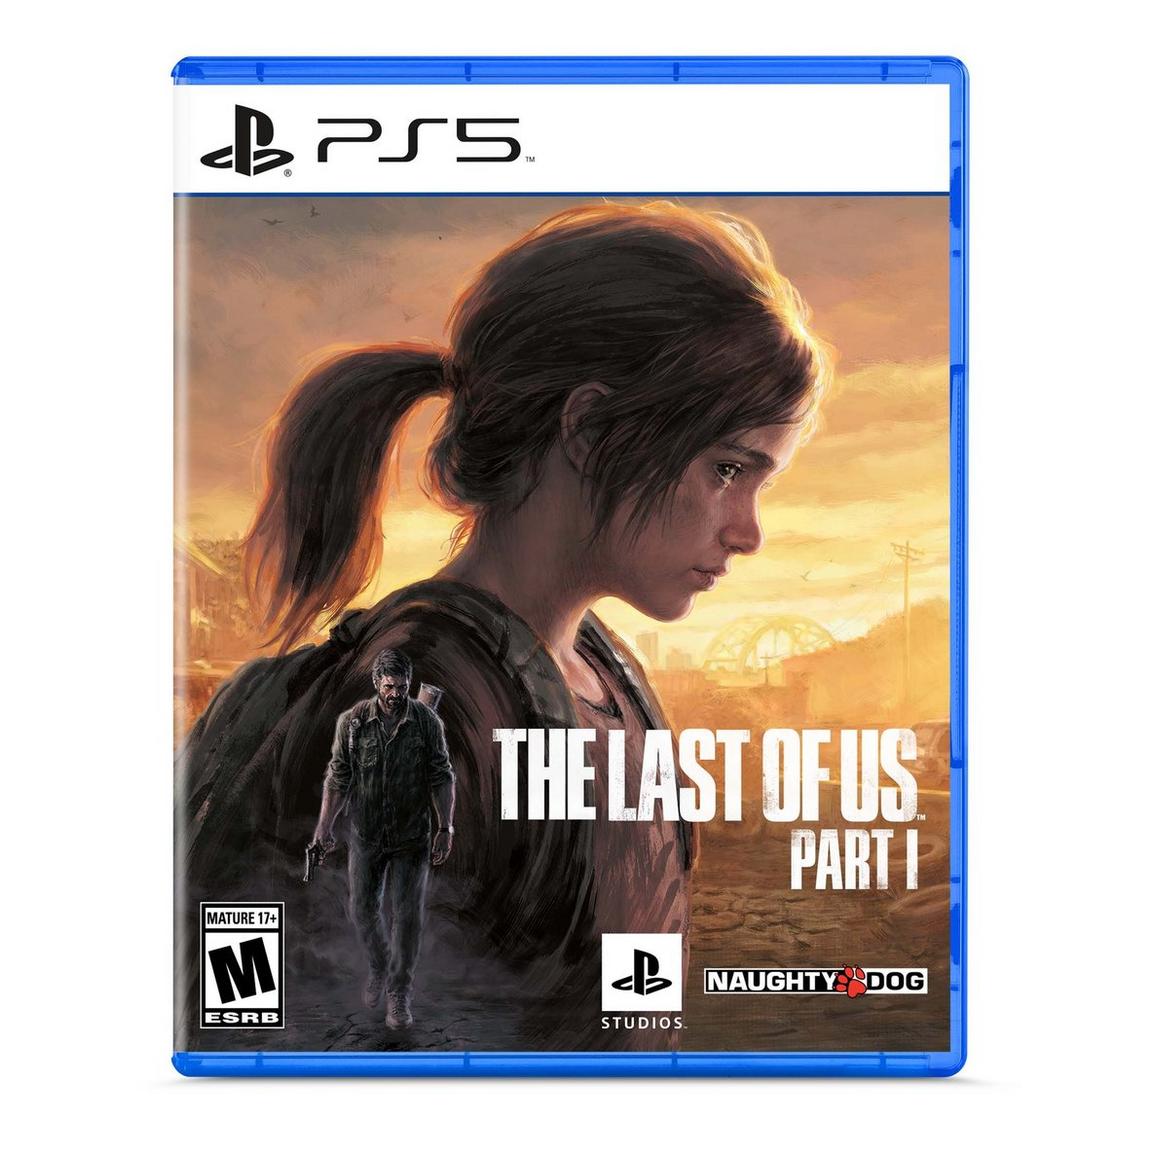 Видеоигра The Last of Us Part 1 - PlayStation 5 the last of us ps5 standard disc edition skin sticker decal cover for playstation 5 console